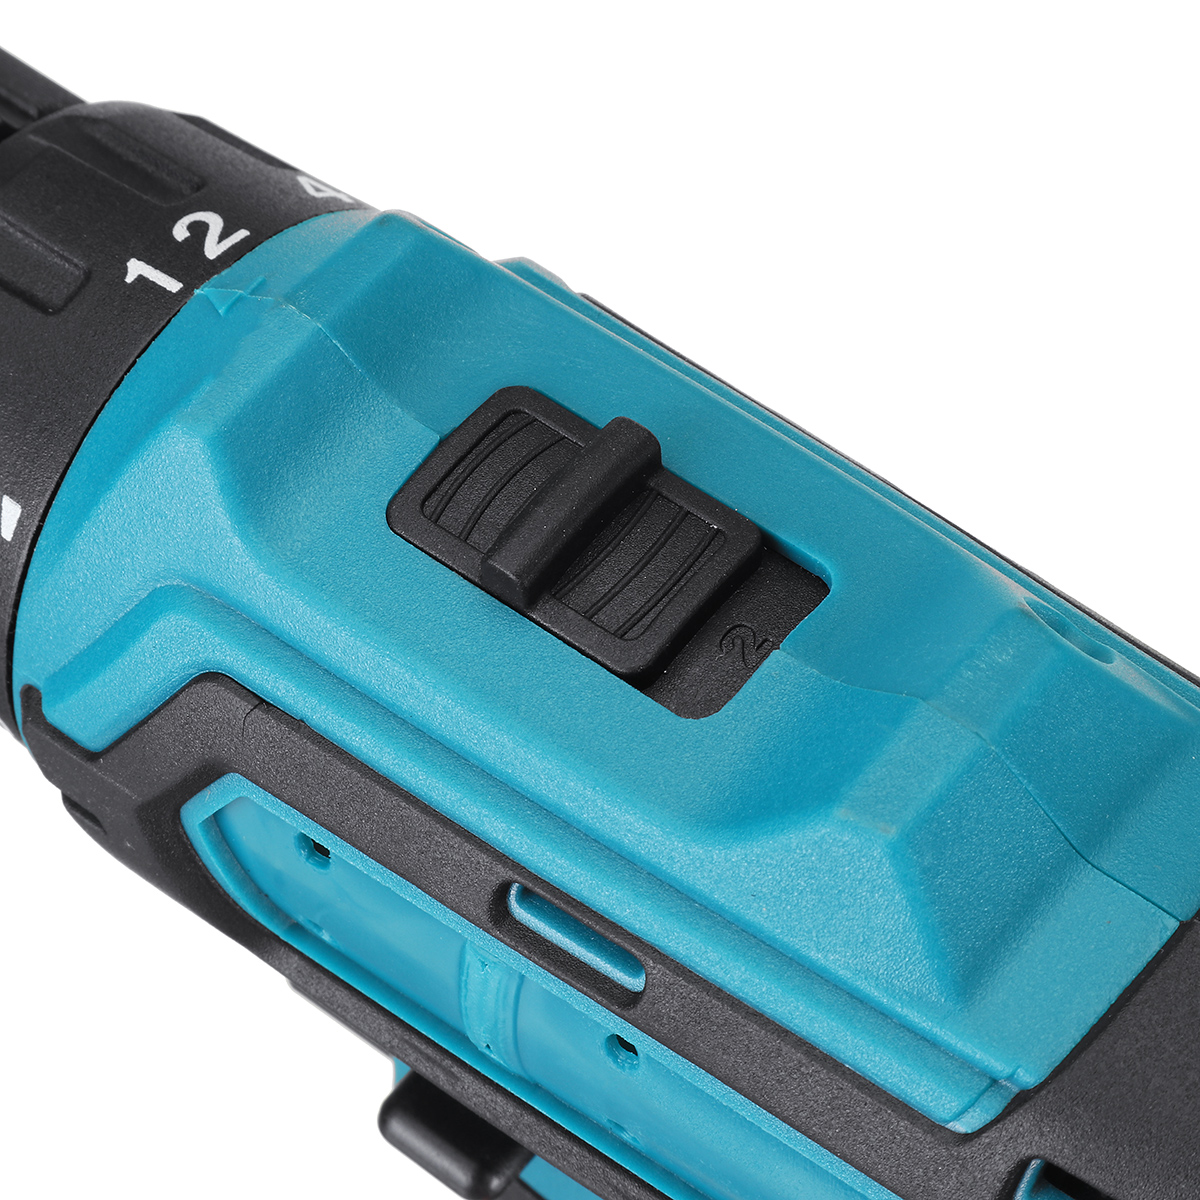 2000rpm-38Nm-21V-Lithium-Electric-Impact-Hammer-Drill-Wood-Drilling-Screwdrivers-with-Battery-1943477-29